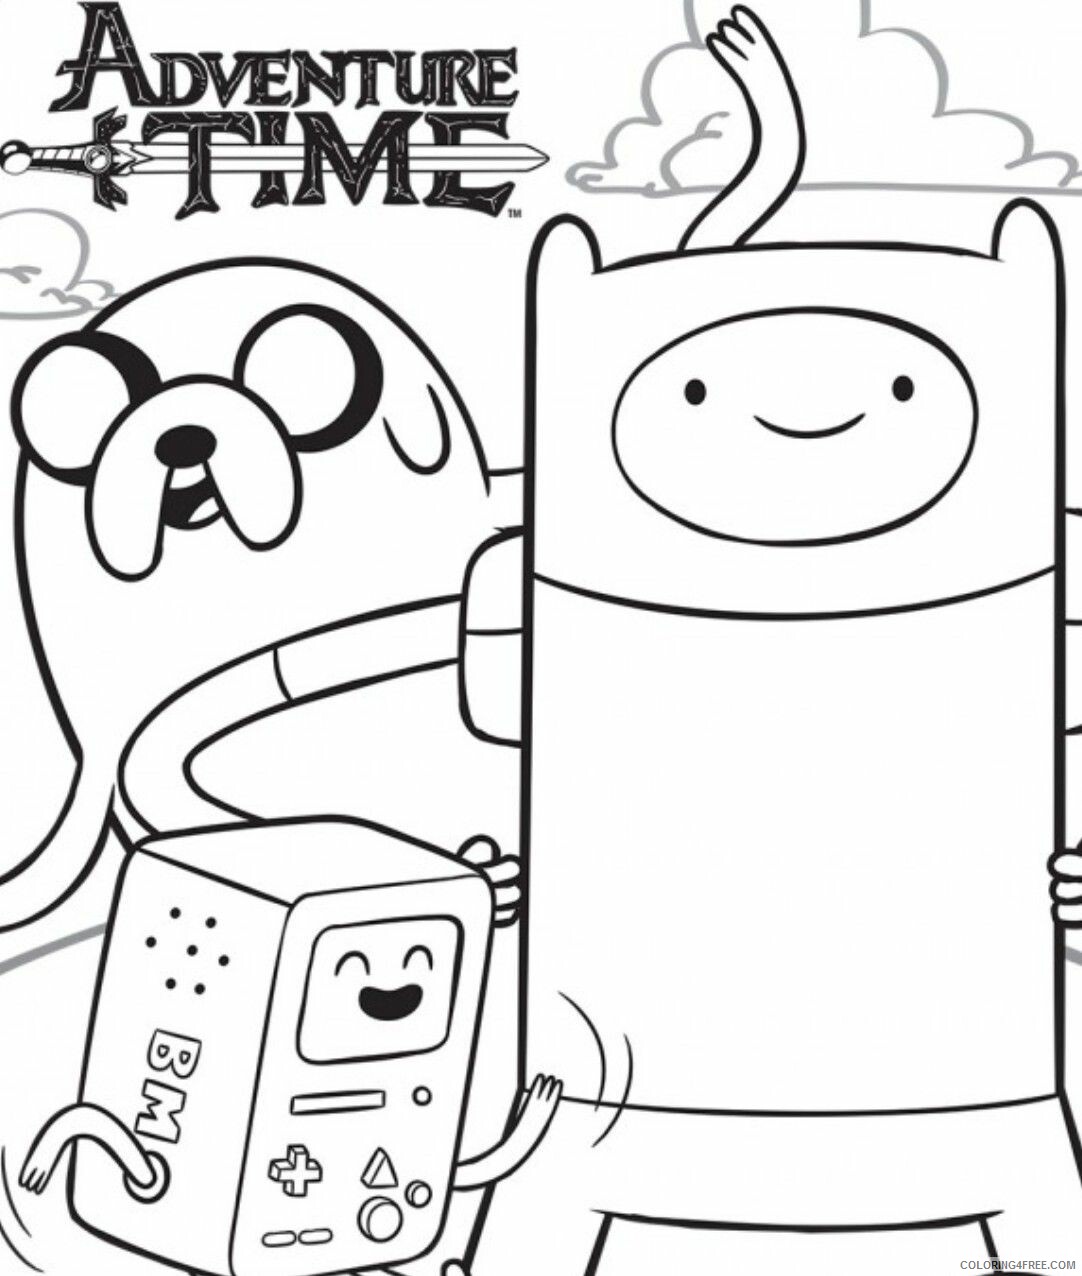 Adventure Time Free Coloring Pages Printable Sheets adventure time Only 2021 a 2705 Coloring4free